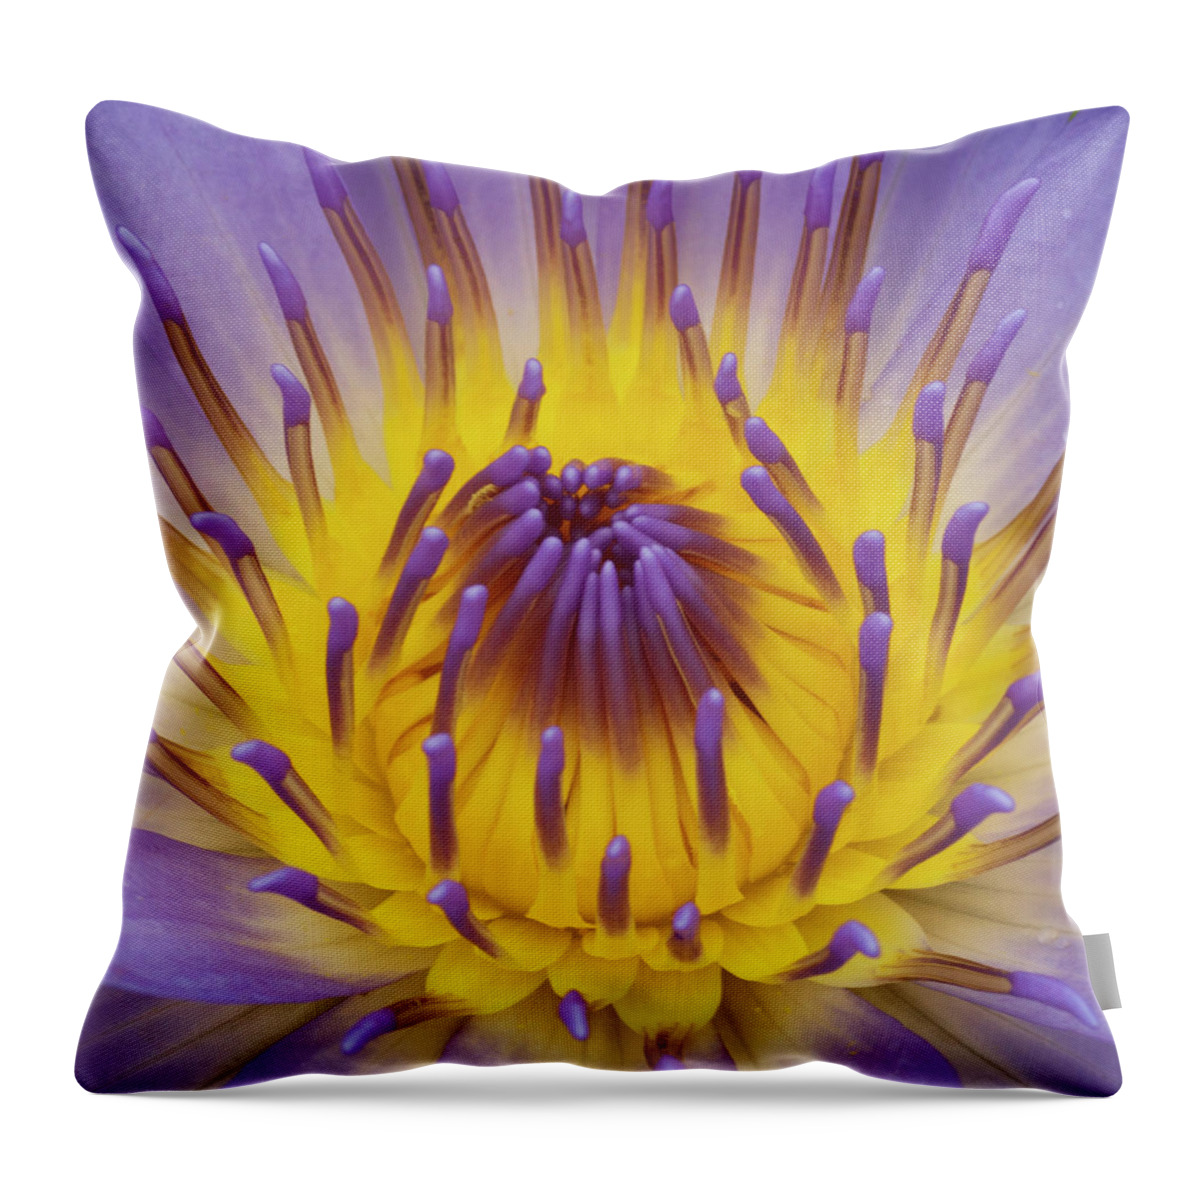 Water Lily Throw Pillow featuring the photograph Blue Water Lily by Heiko Koehrer-Wagner